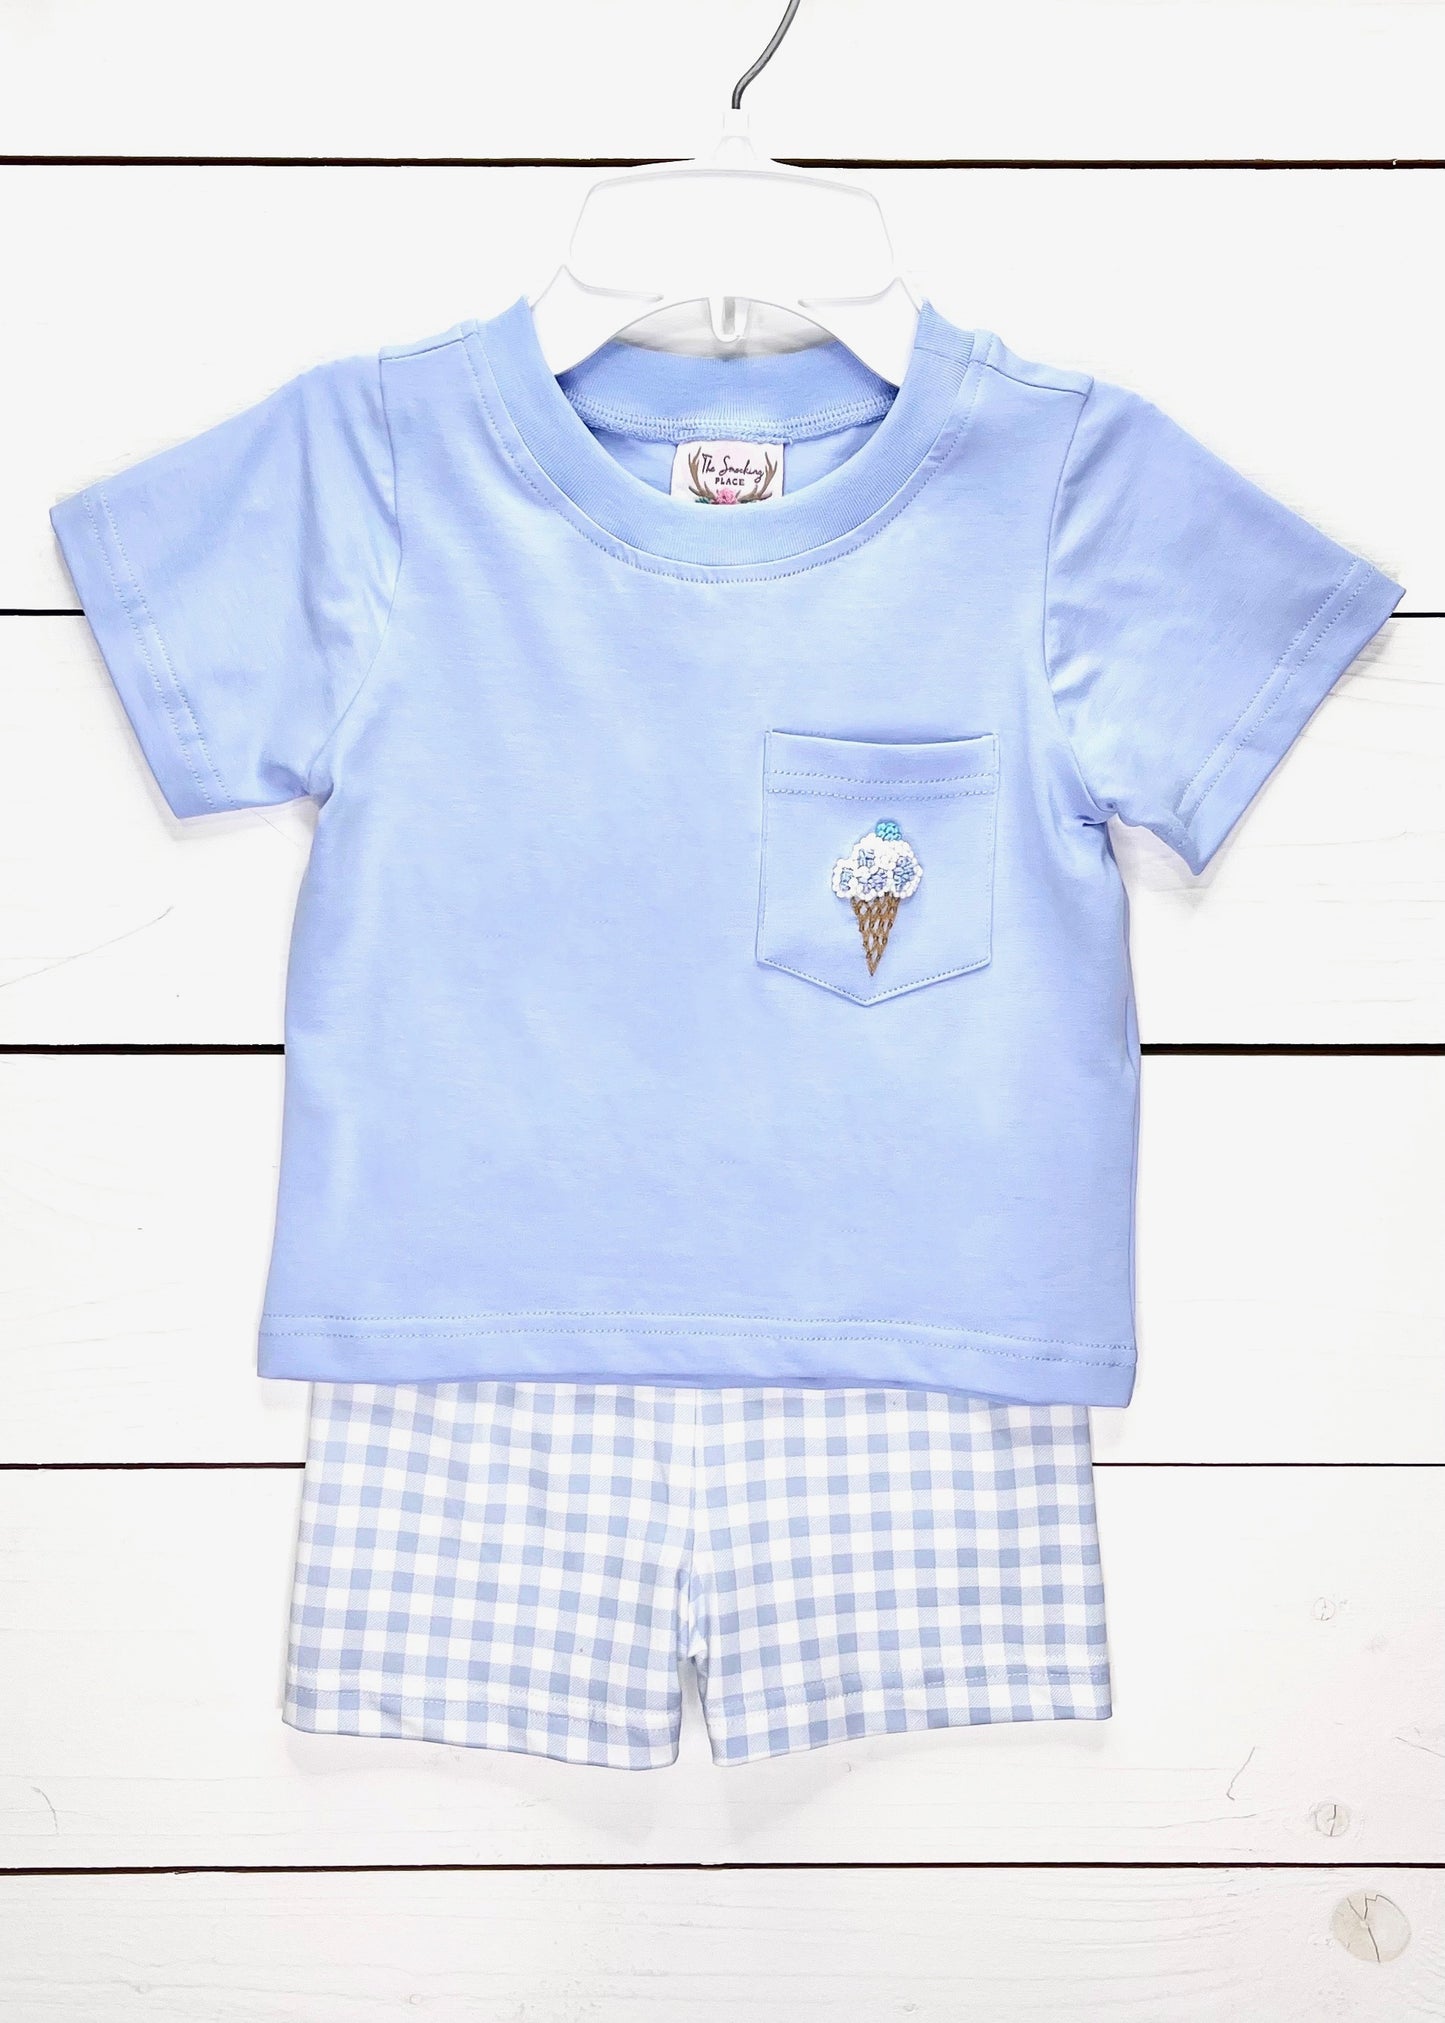 Ice Cream French Knot Knit Blue Gingham Short Set